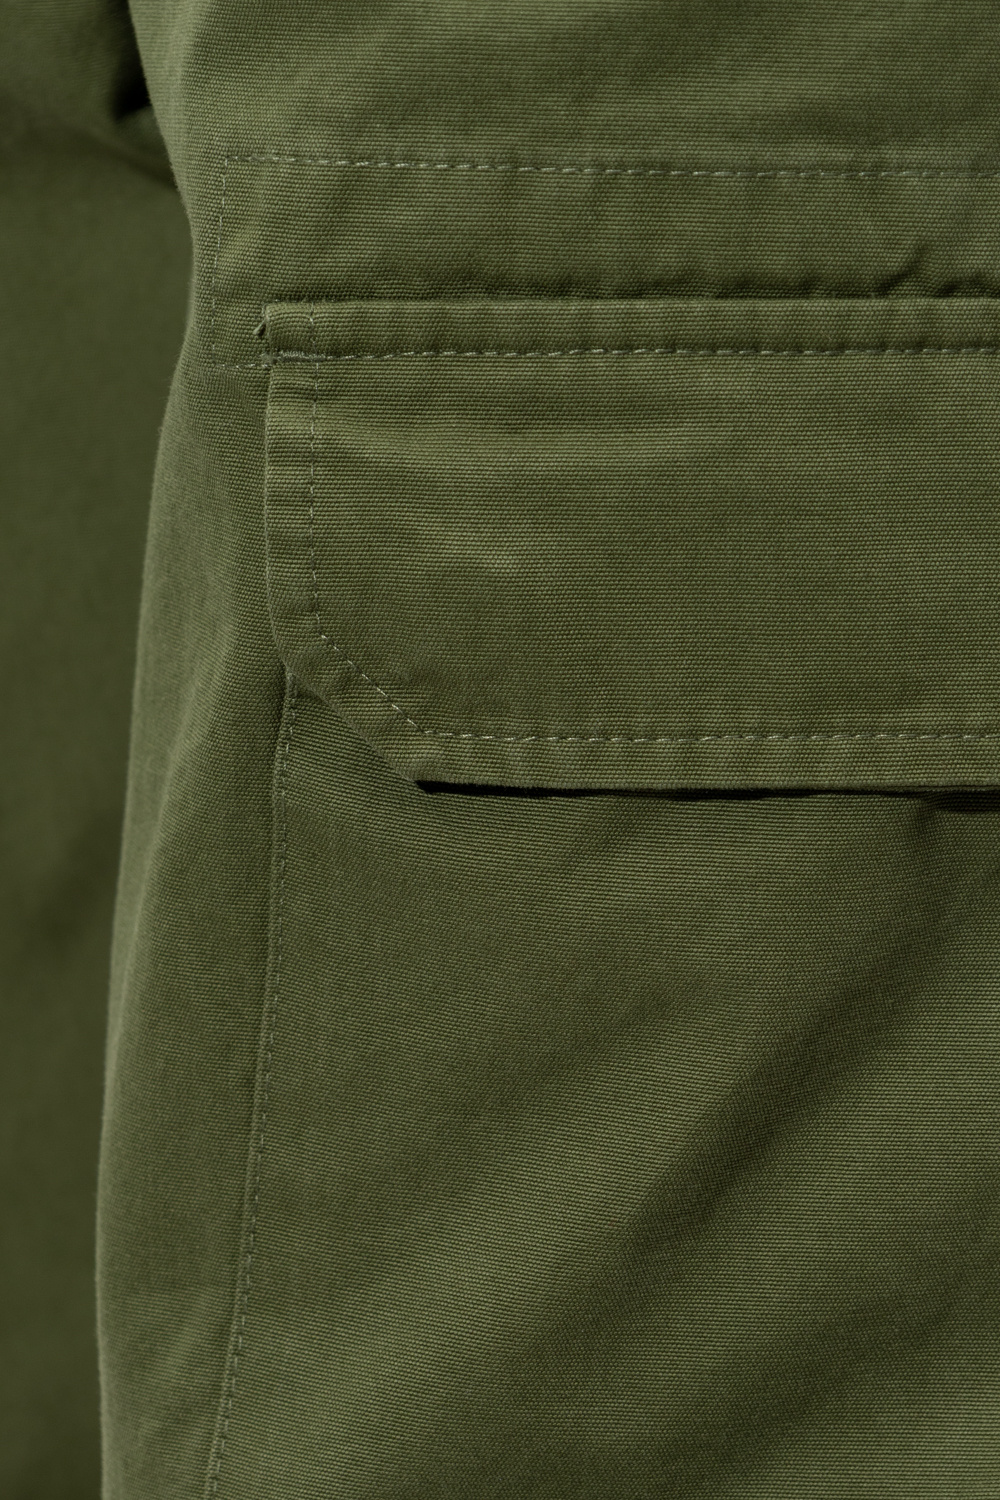 A.P.C. ‘Codey’ trousers with multiple pockets